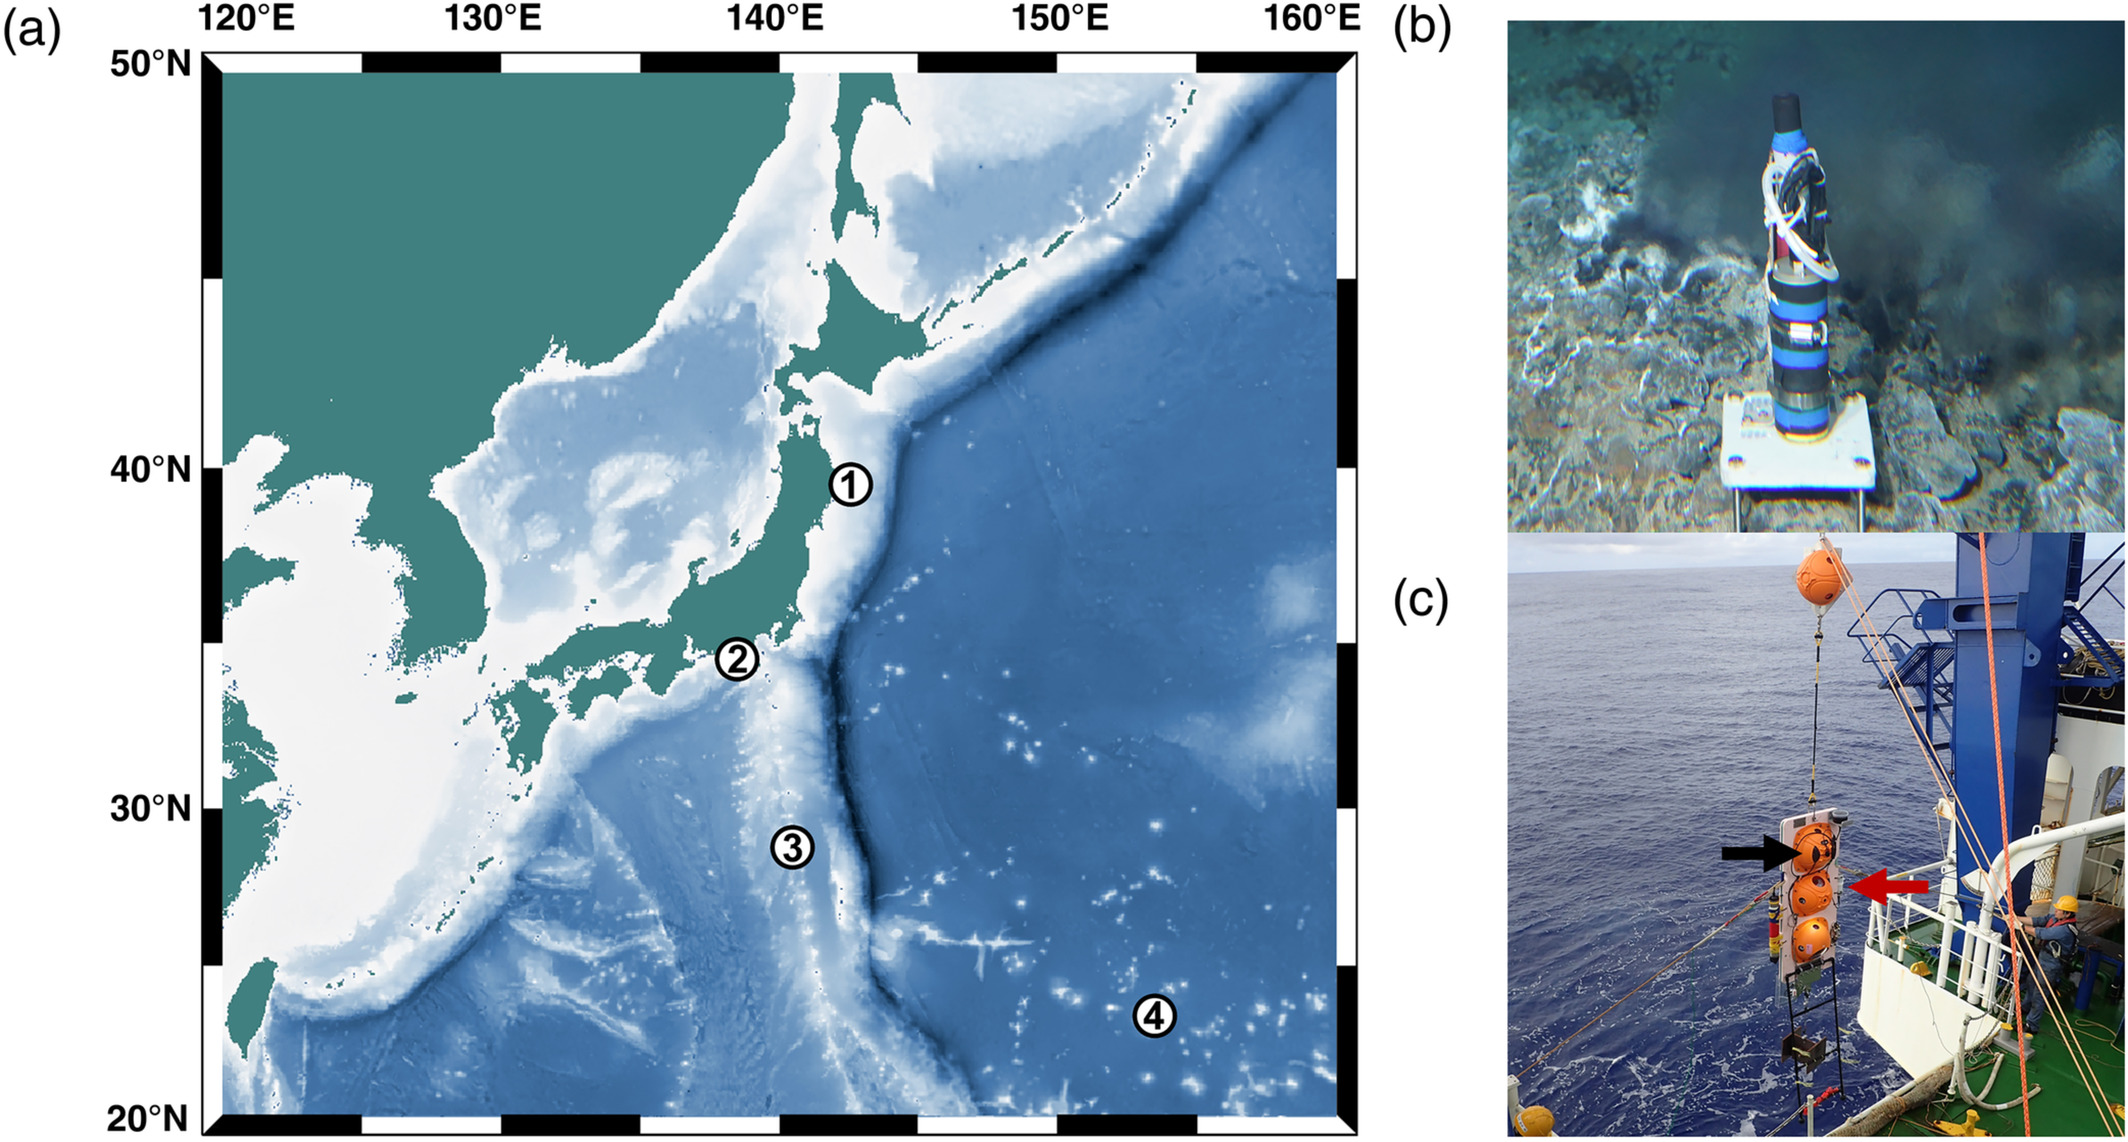 Disparate baseline soundscapes from different deep-sea ecosystems: implications on environmental monitoring and assessment